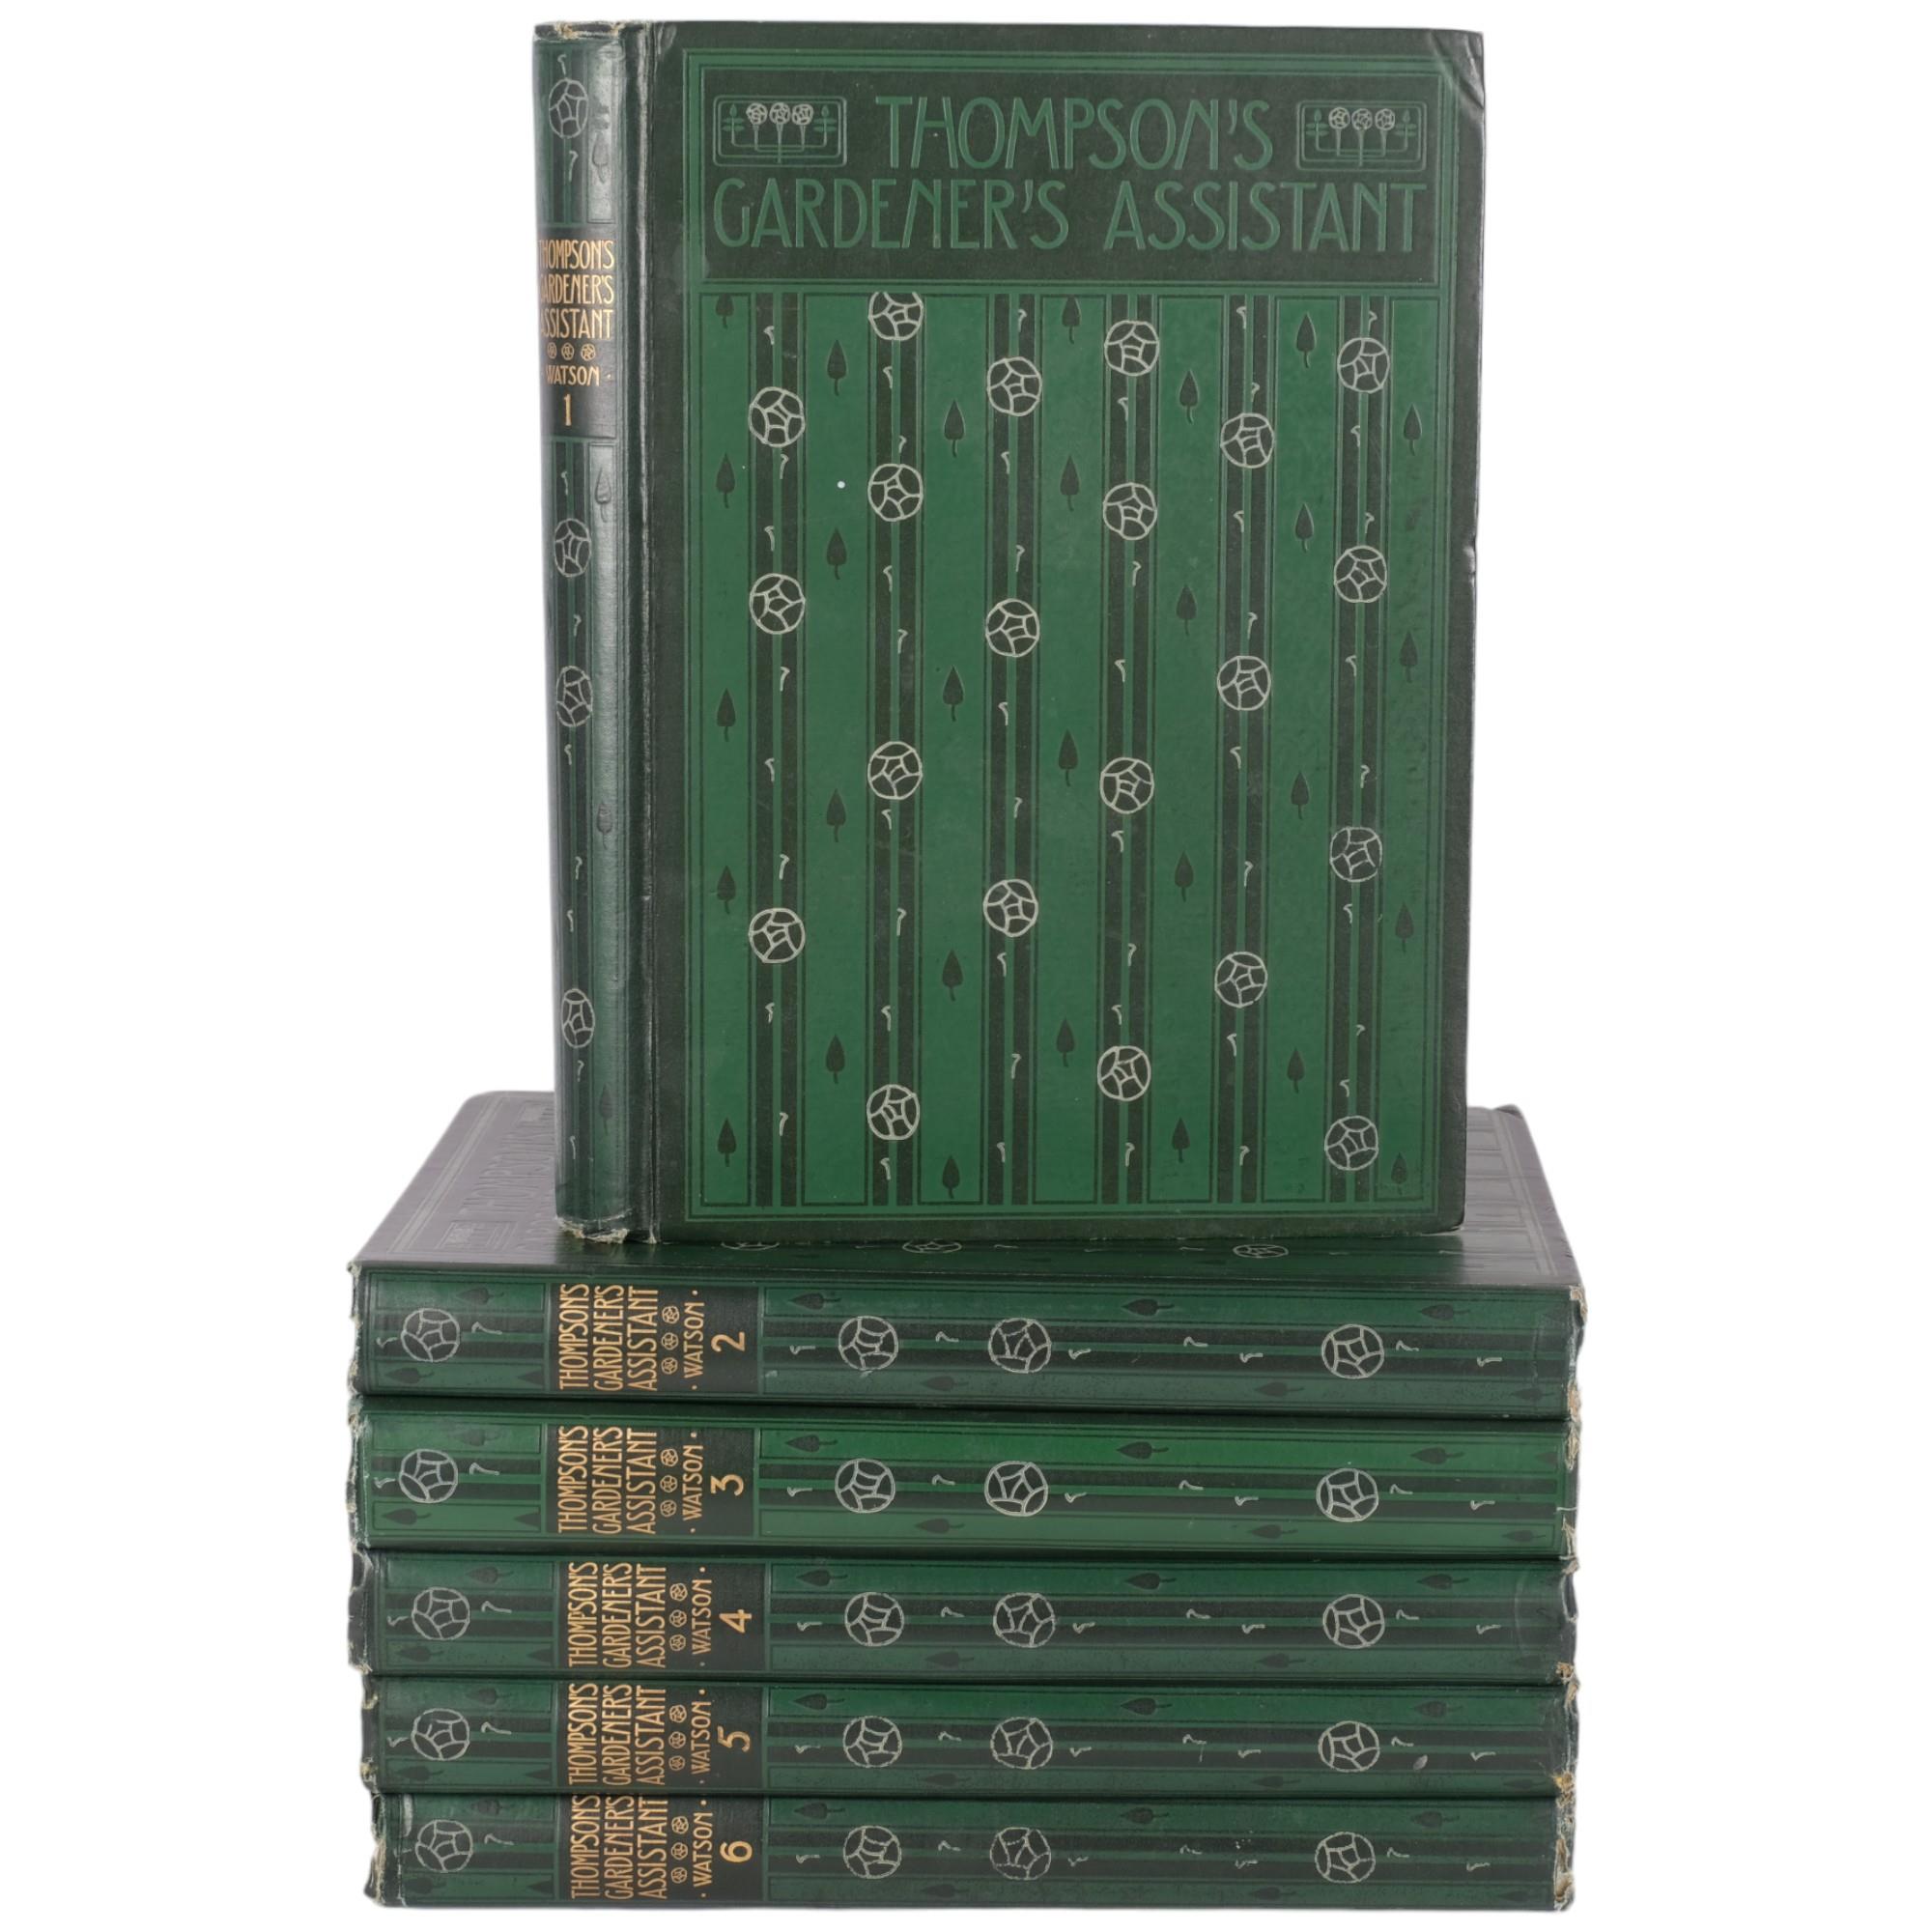 Thompsons Gardener's Assistant, volumes 1-6, these are the revised and entirely remodelled